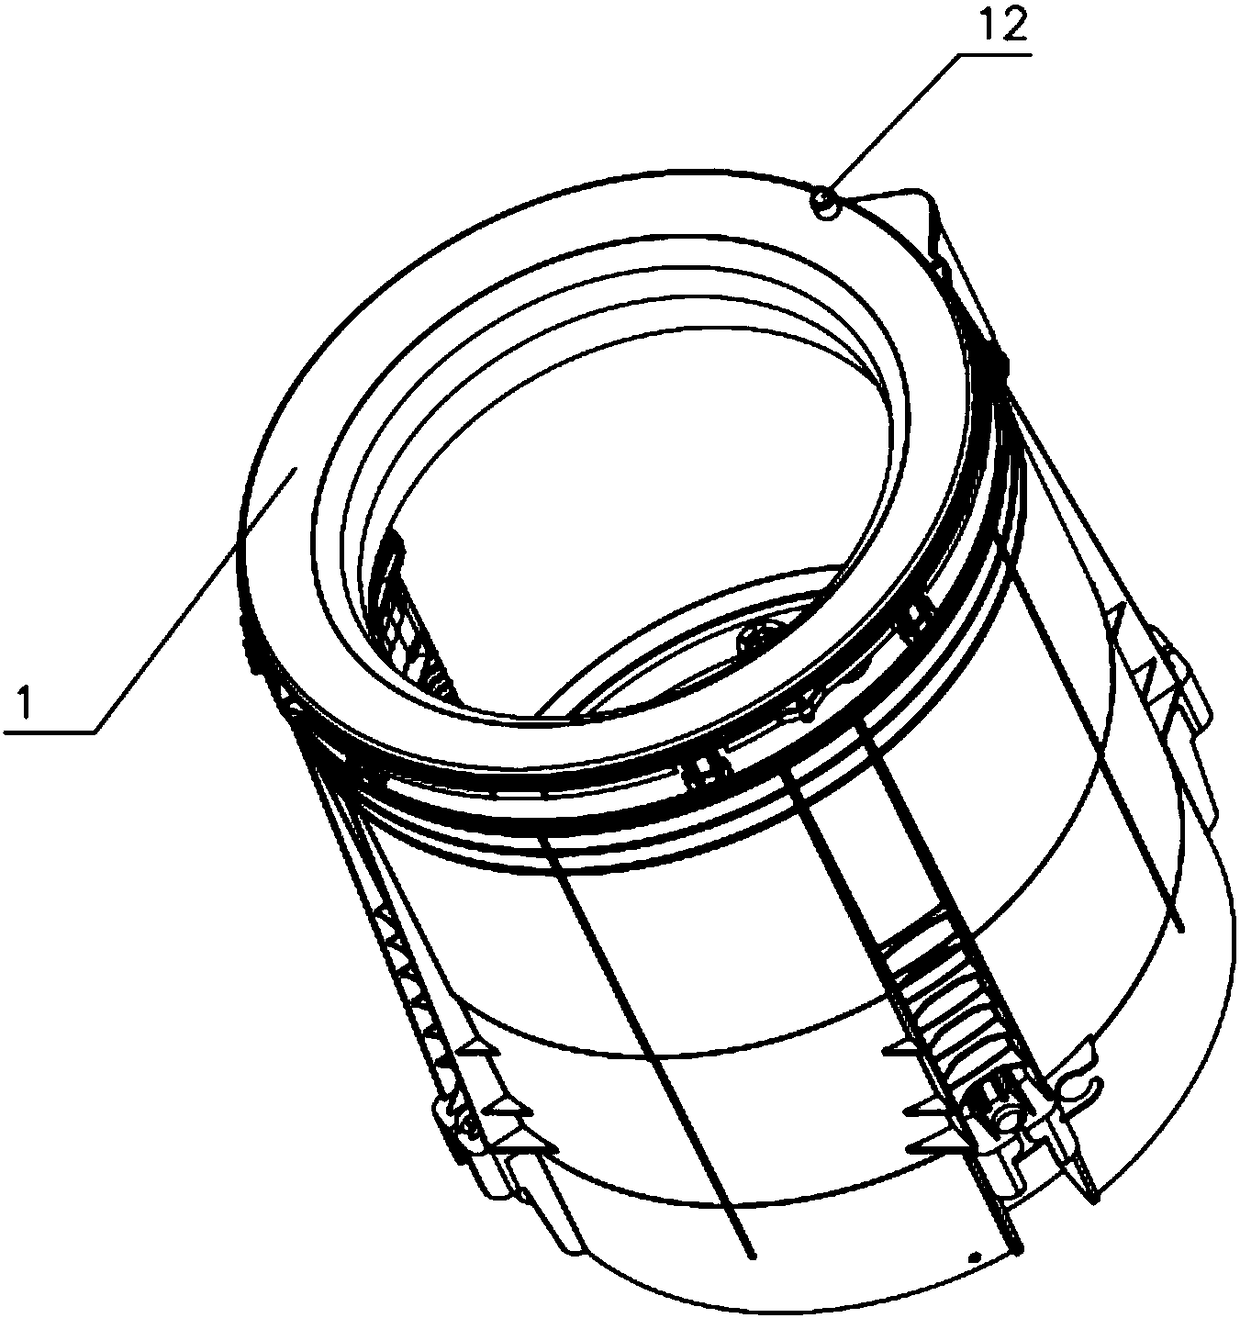 Outer drum cover capable of cleaning inner drum and outer drum of washing machine and washing machine